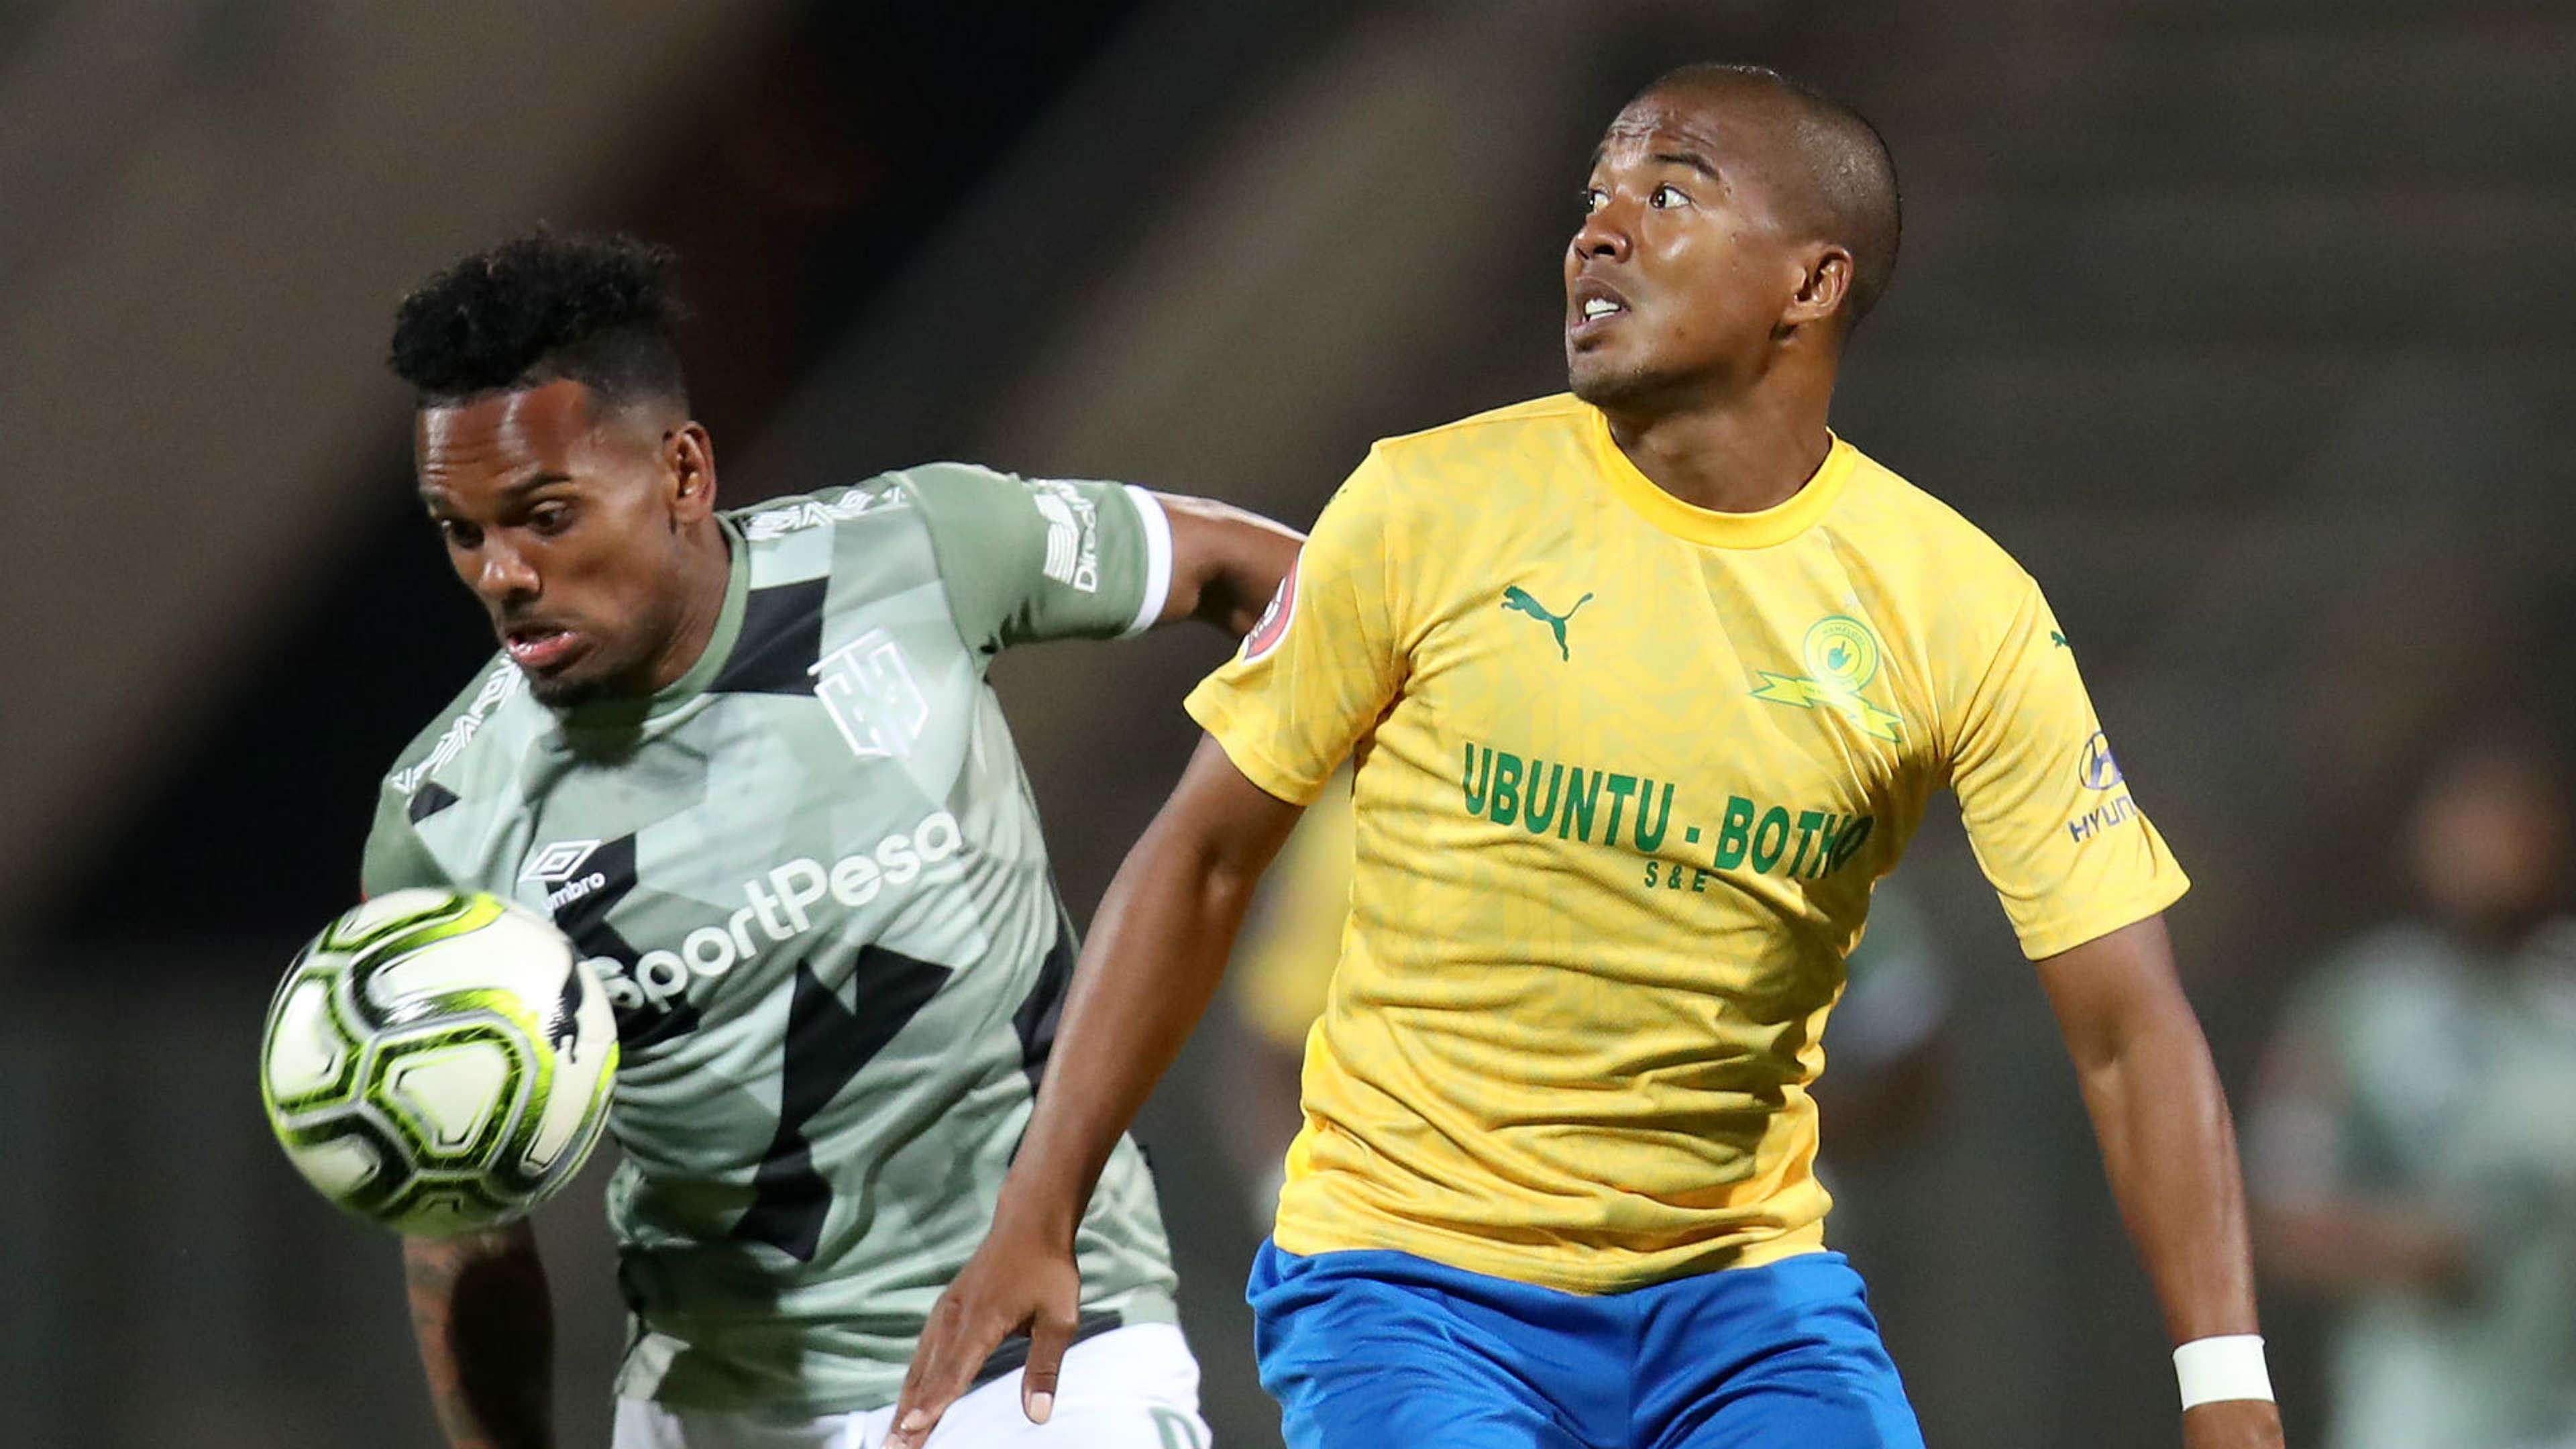 Lyle Lakay of Mamelodi Sundowns challenged by Kermit Romeo Erasmus of Cape Town City, August 2019